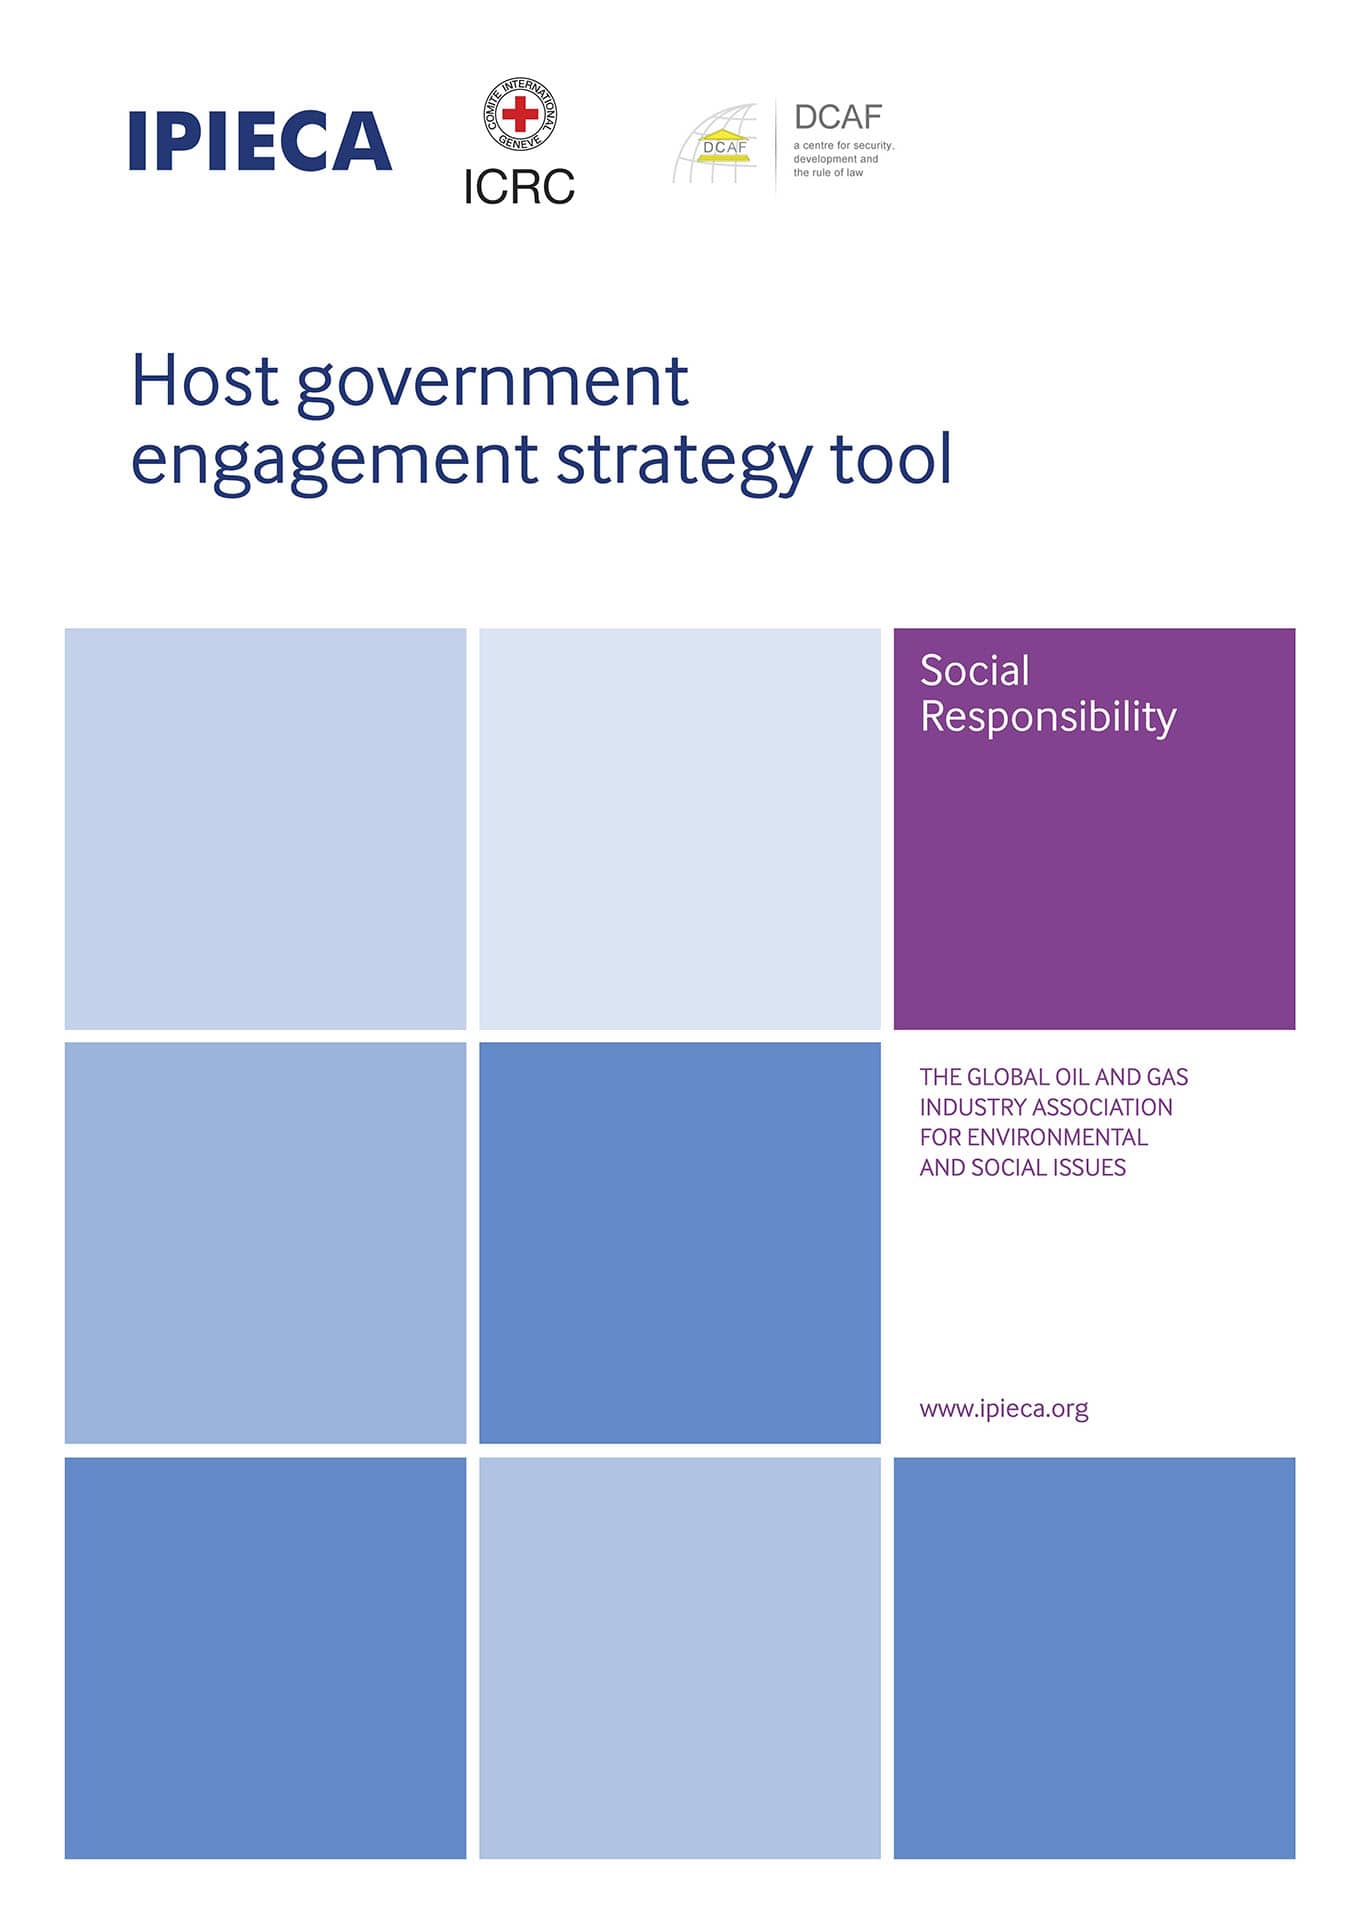 Host Government Engagement Strategy Tool (DCAF, ICRC and IPIECA, 2017)